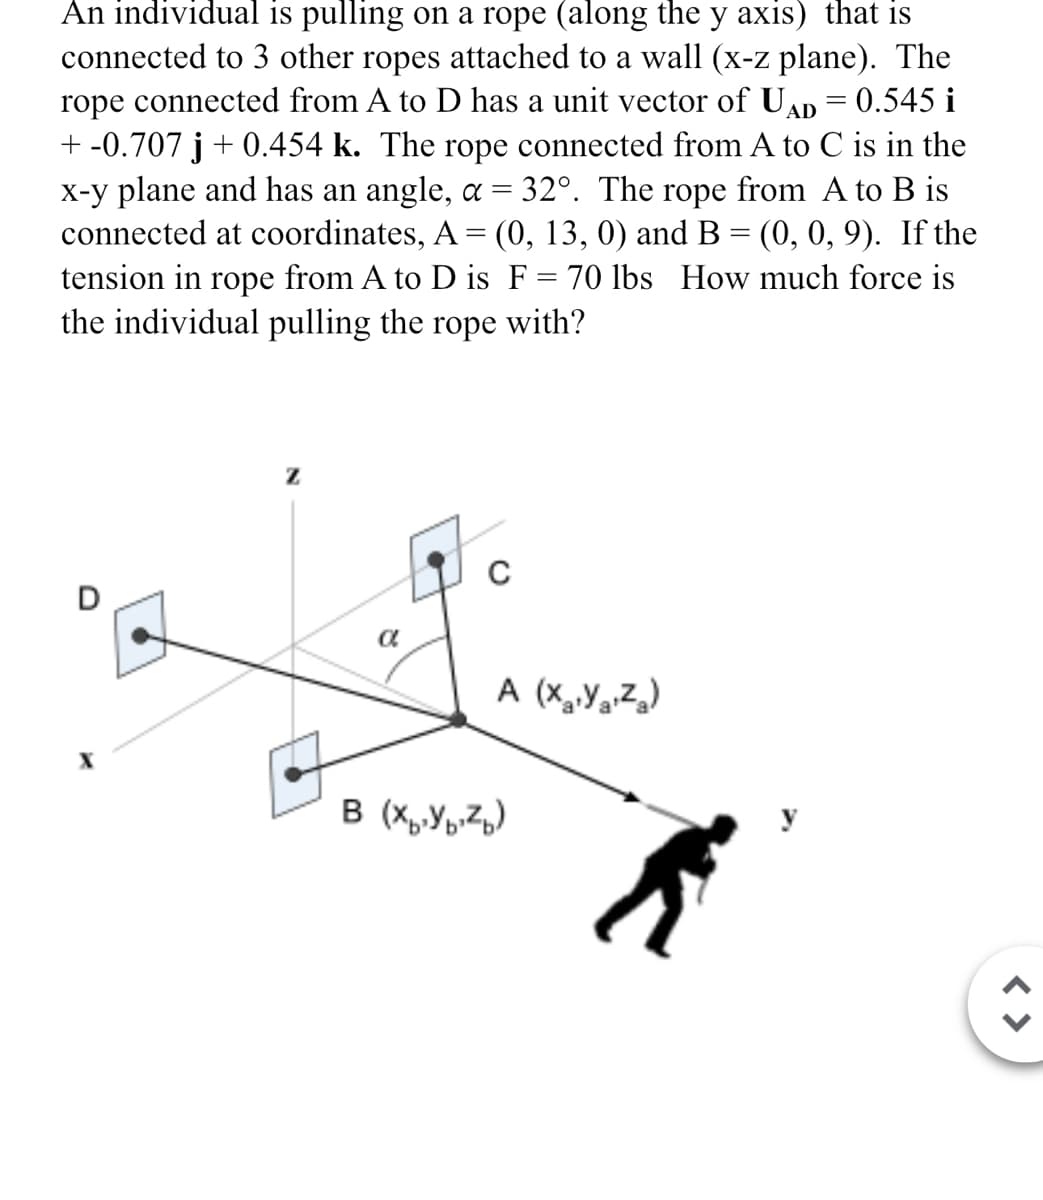 An individual is pulling on a rope (along the y axis) that is
connected to 3 other ropes attached to a wall (x-z plane). The
rope connected from A to D has a unit vector of UAD = 0.545 i
+ -0.707 j + 0.454 k. The rope connected from A to C is in the
x-y plane and has an angle, α = 32°. The rope from A to B is
connected at coordinates, A = (0, 13, 0) and B = (0, 0, 9). If the
tension in rope from A to D is F = 70 lbs How much force is
the individual pulling the rope with?
Z
a
C
A (XYZ)
B (XYZ)